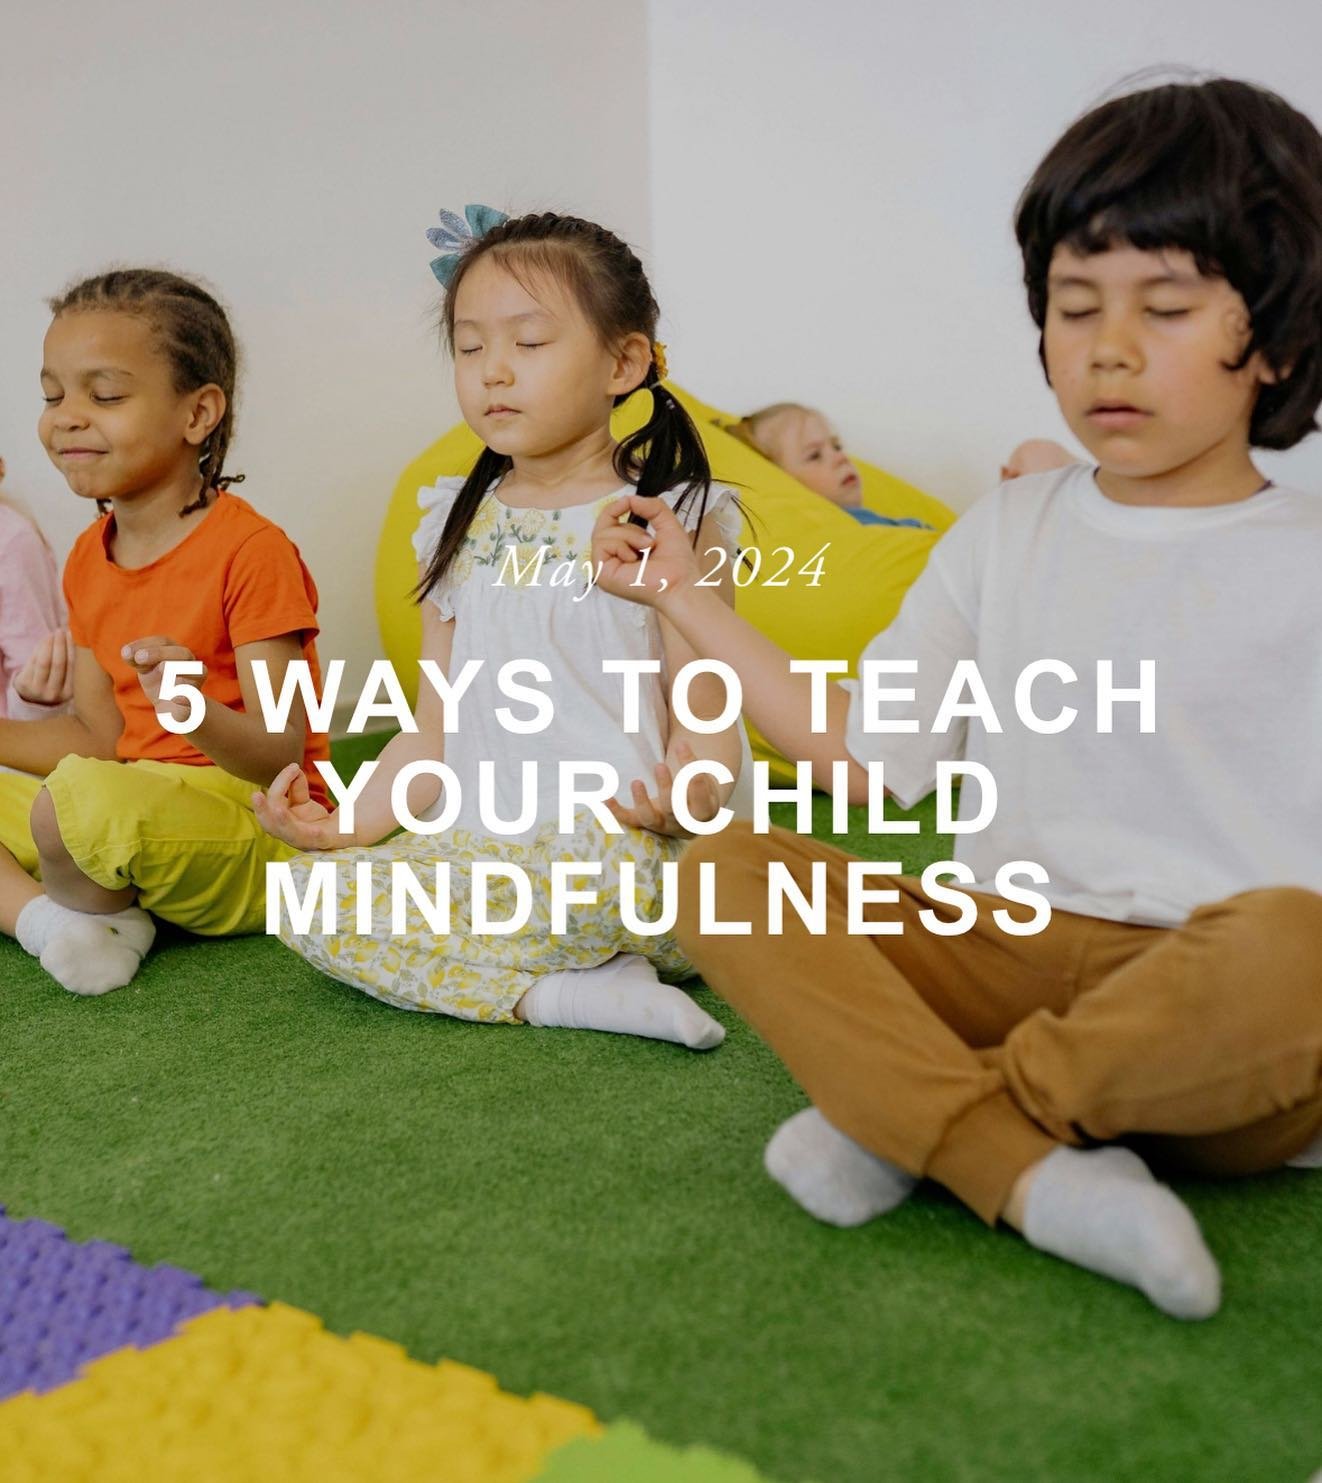 If you want to teach your child about mindfulness, this is the blog for you!

&ldquo;&ldquo;Mindfulness&rdquo; is a term that is thrown around a lot, especially in recent years. When we teach children mindfulness, we are giving them the tools they ne